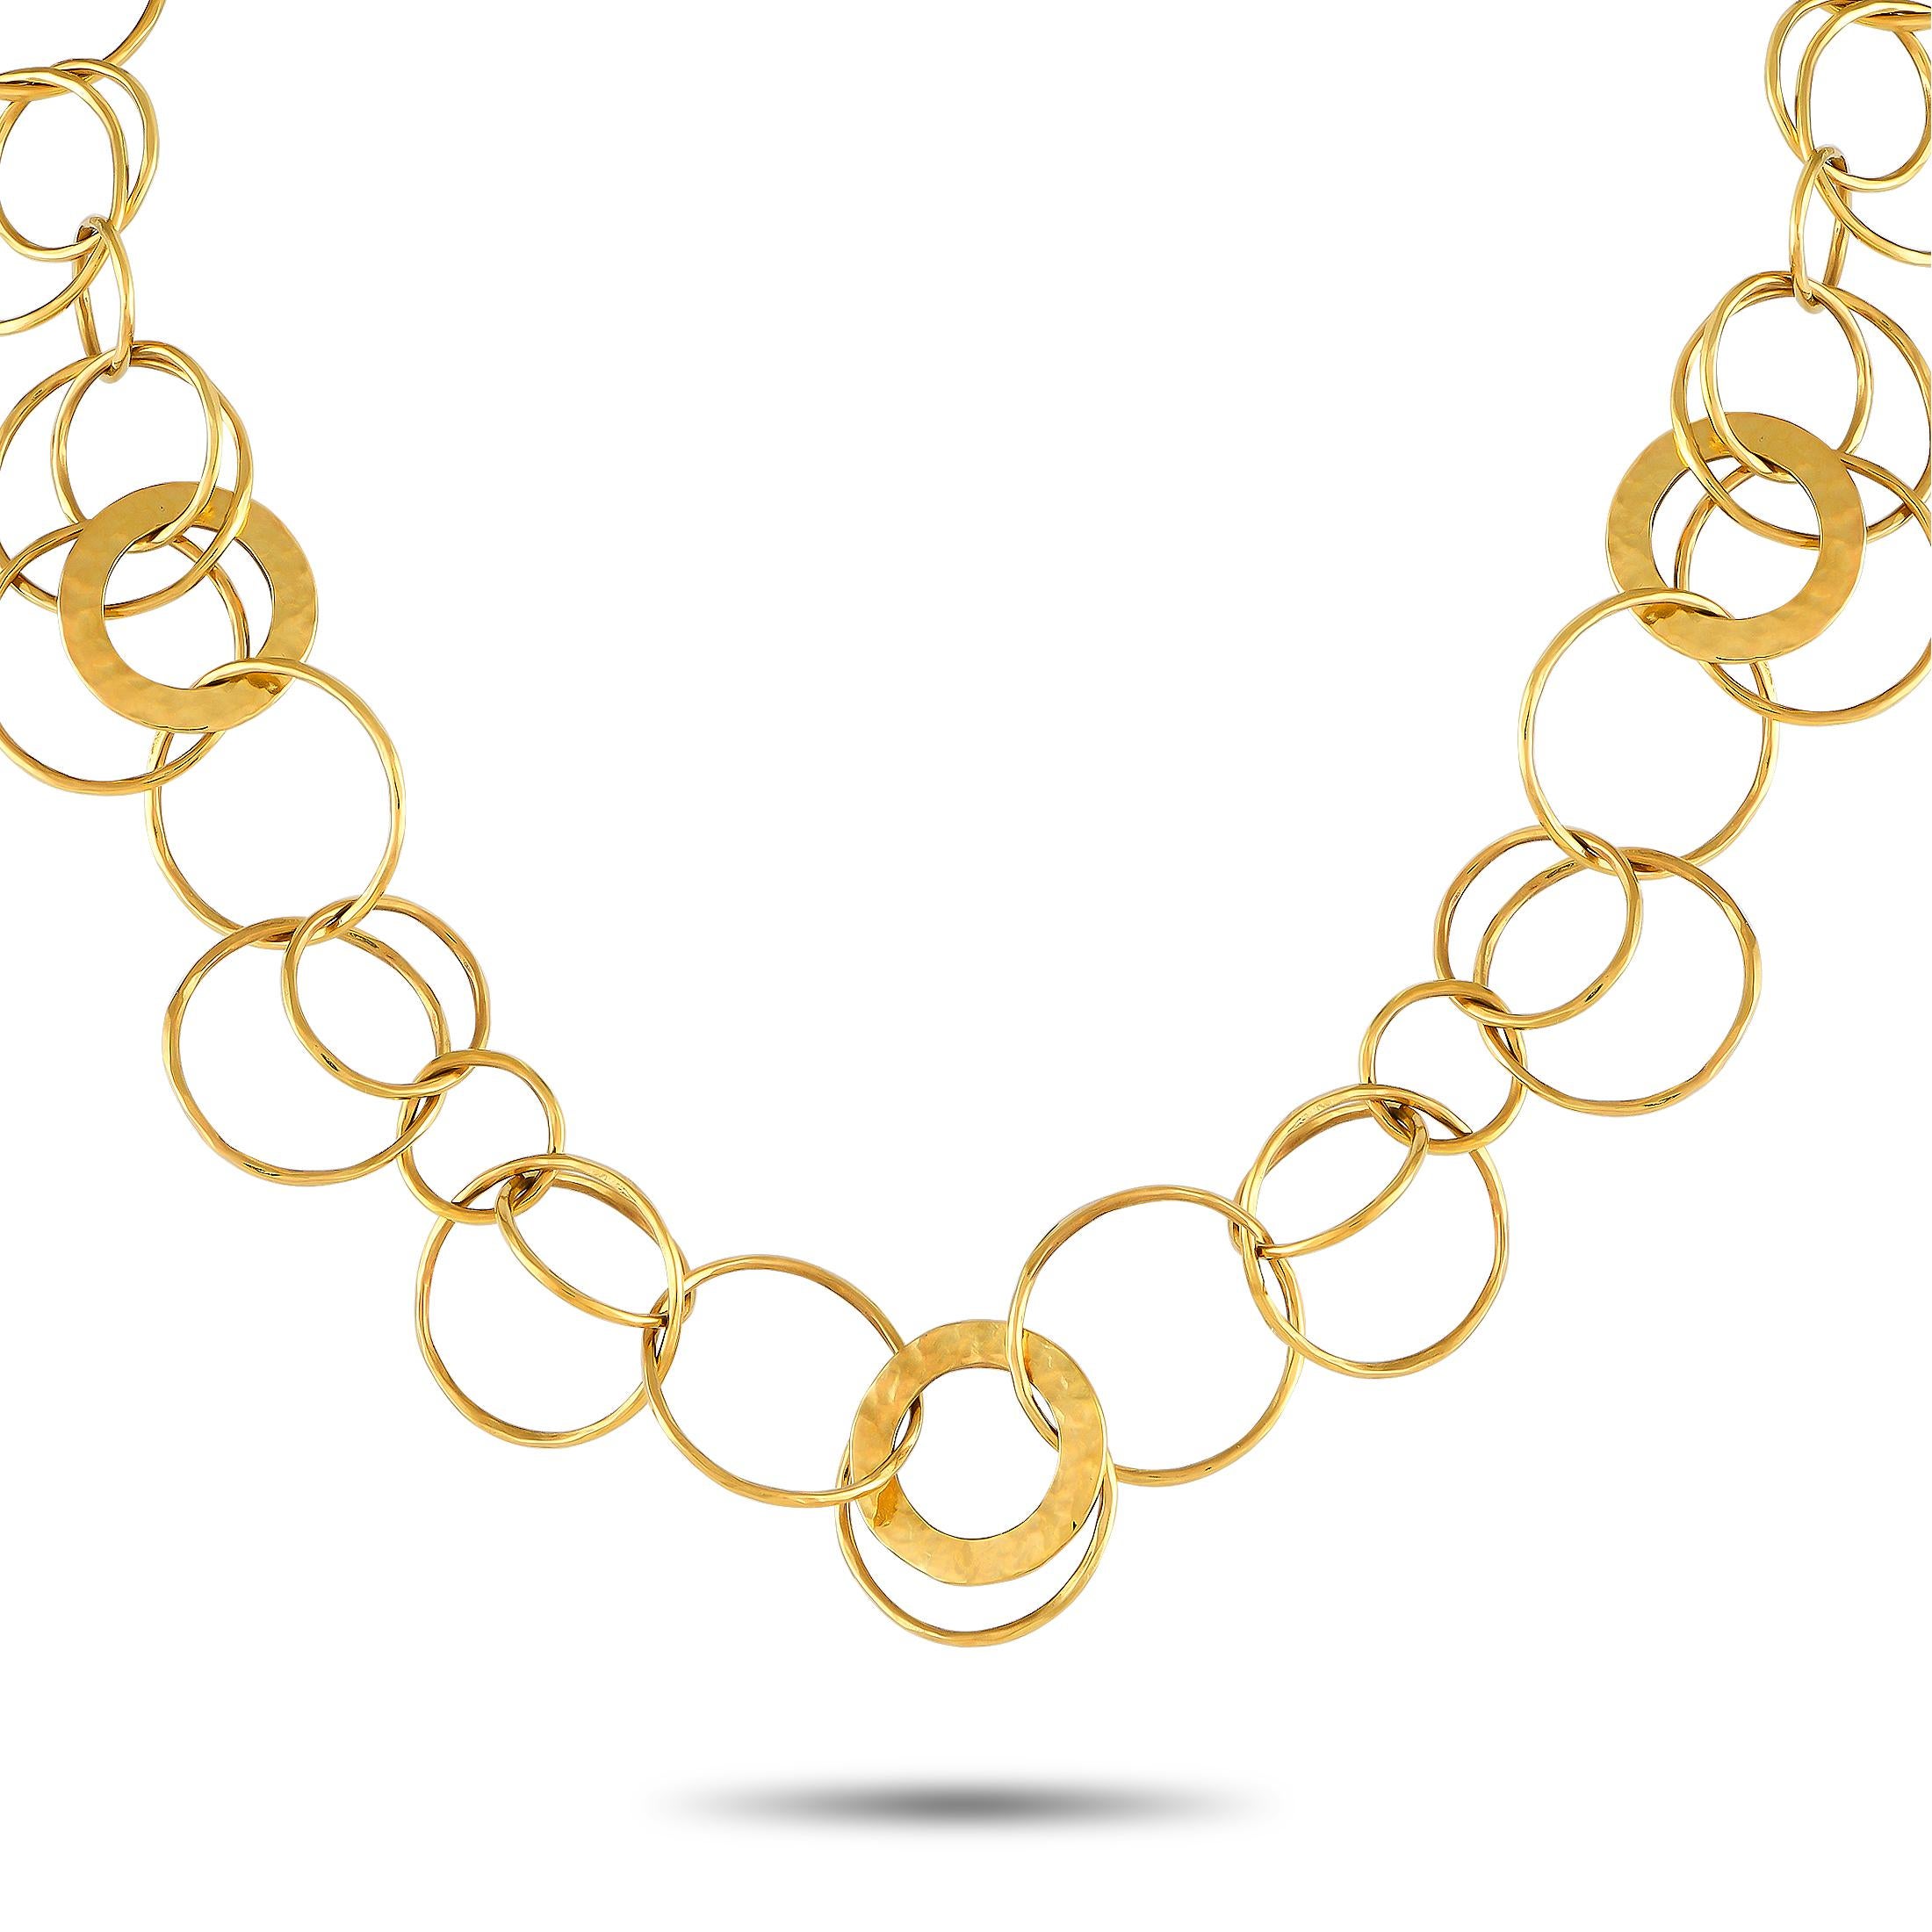 Women's Ippolita 18K Yellow Gold Link Necklace MF25-012324 For Sale